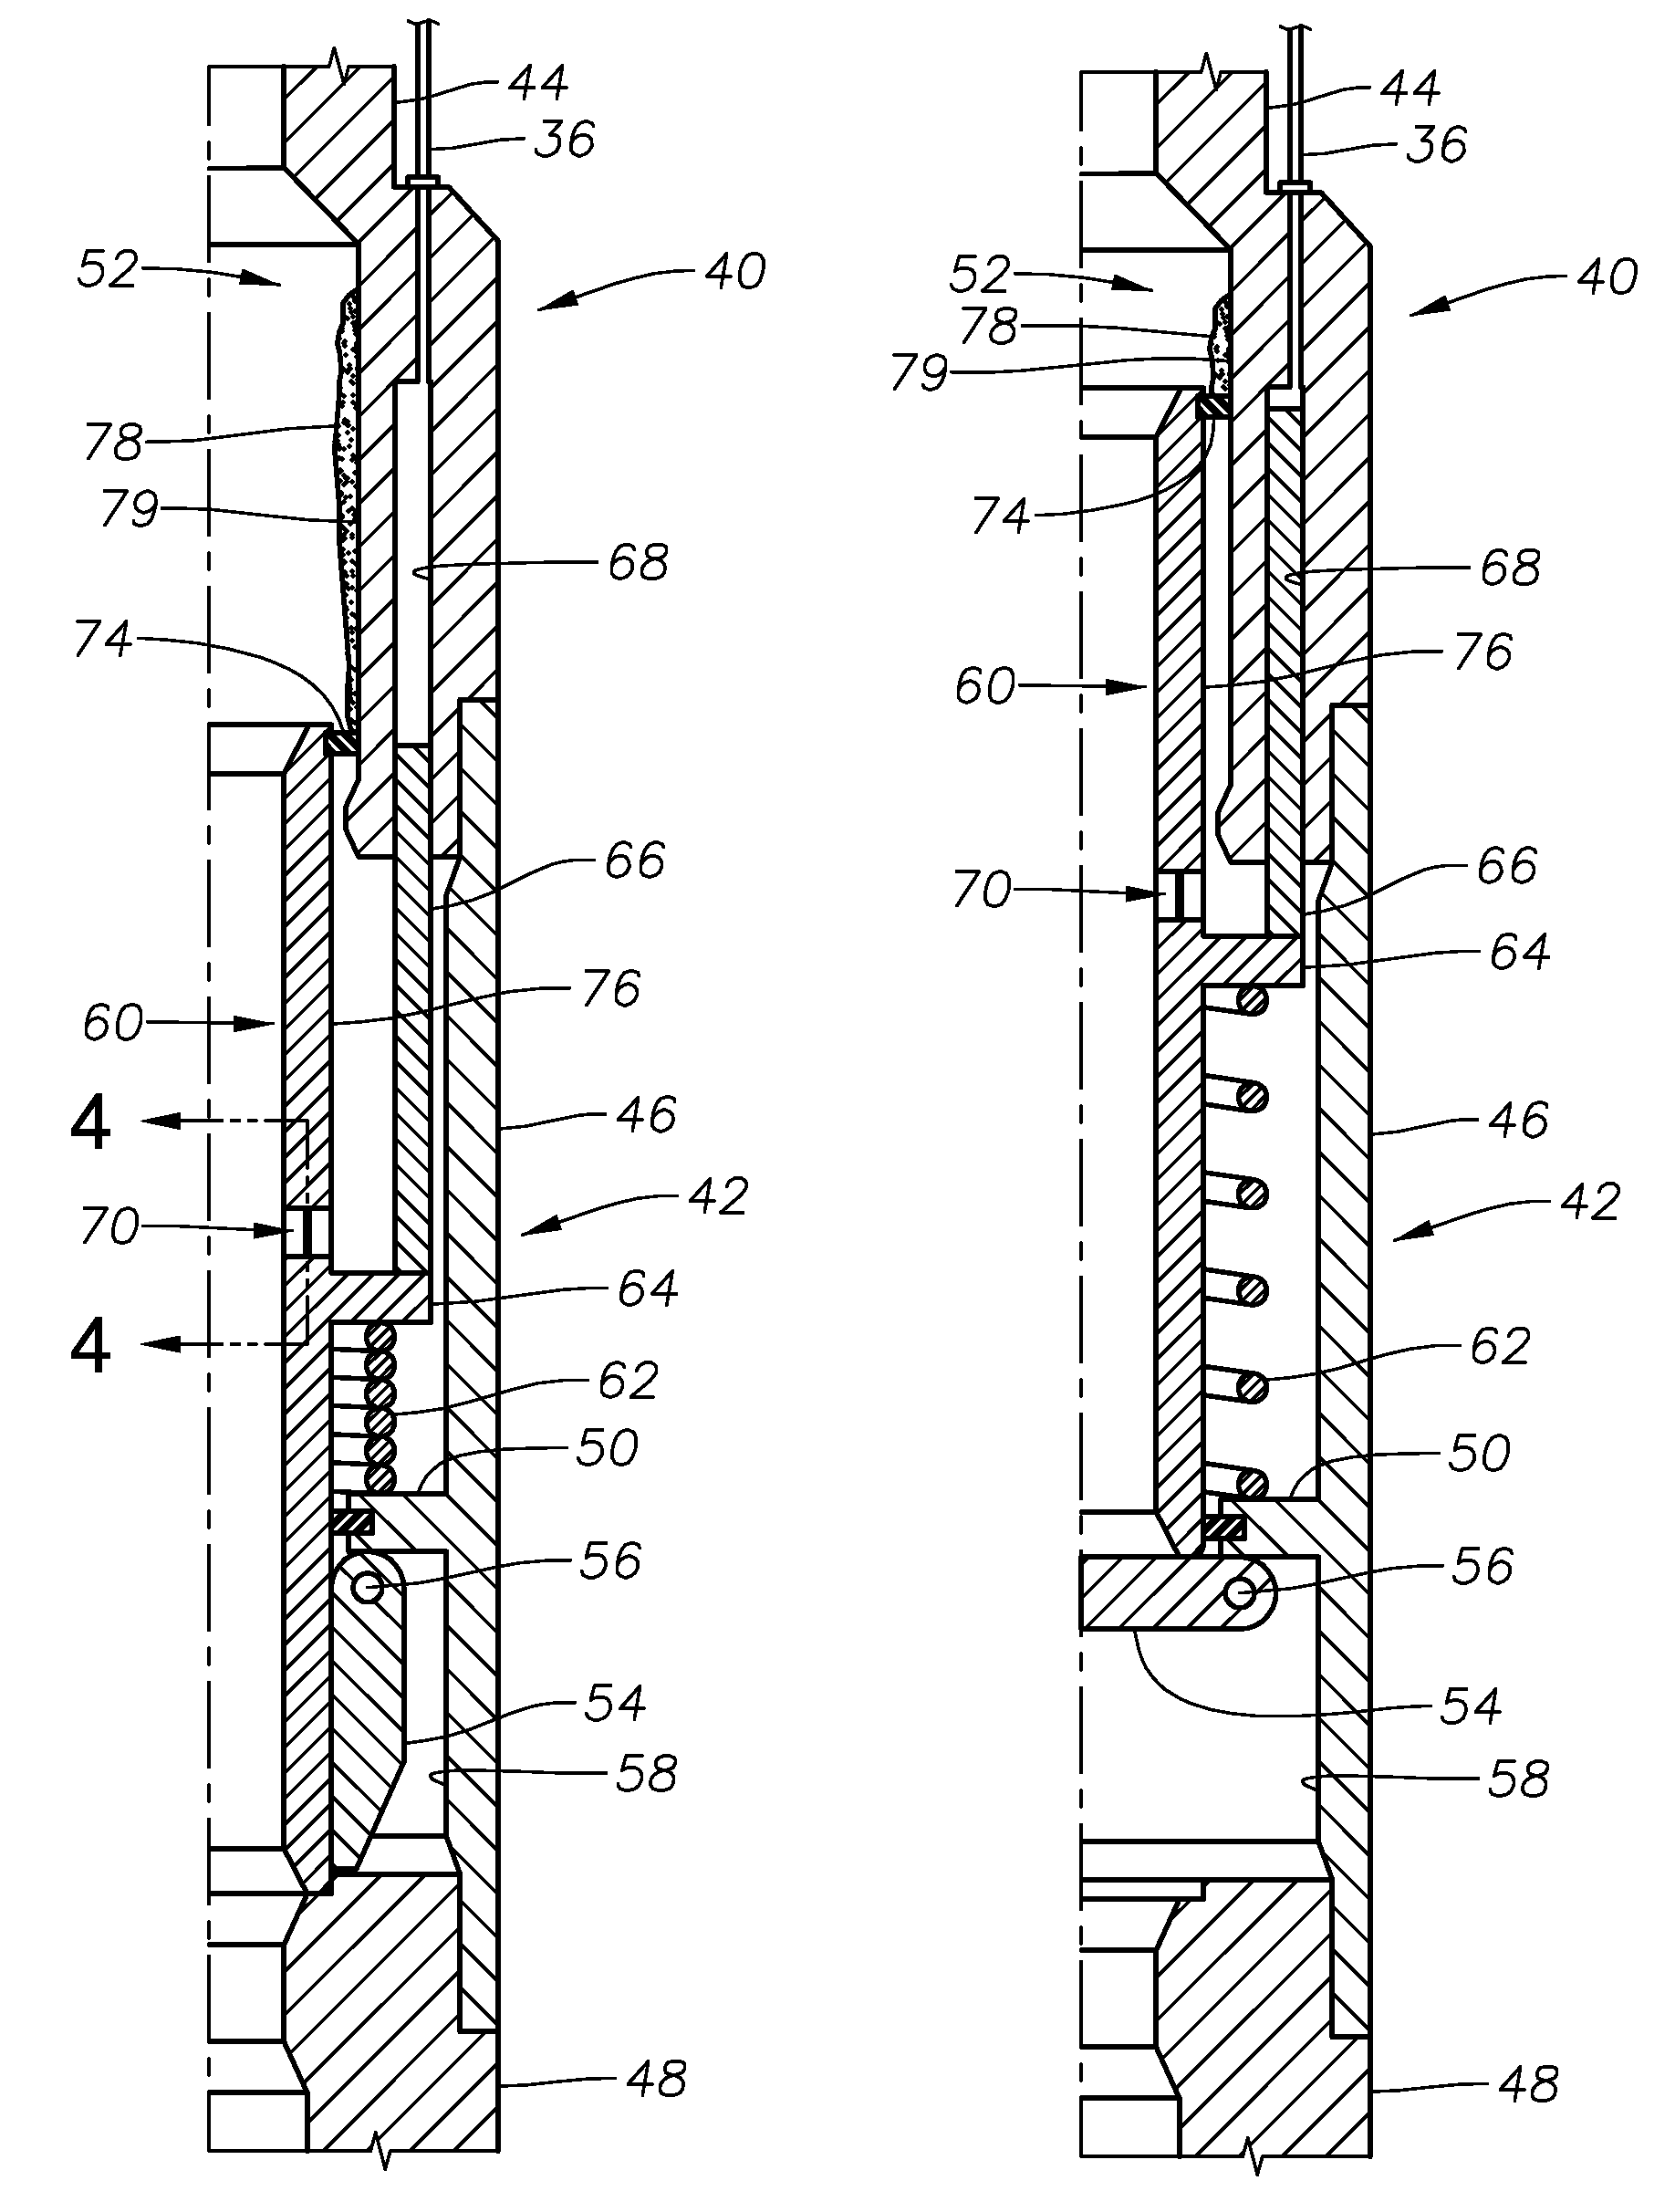 Methods and apparatus for negating mineral scale buildup in flapper valves